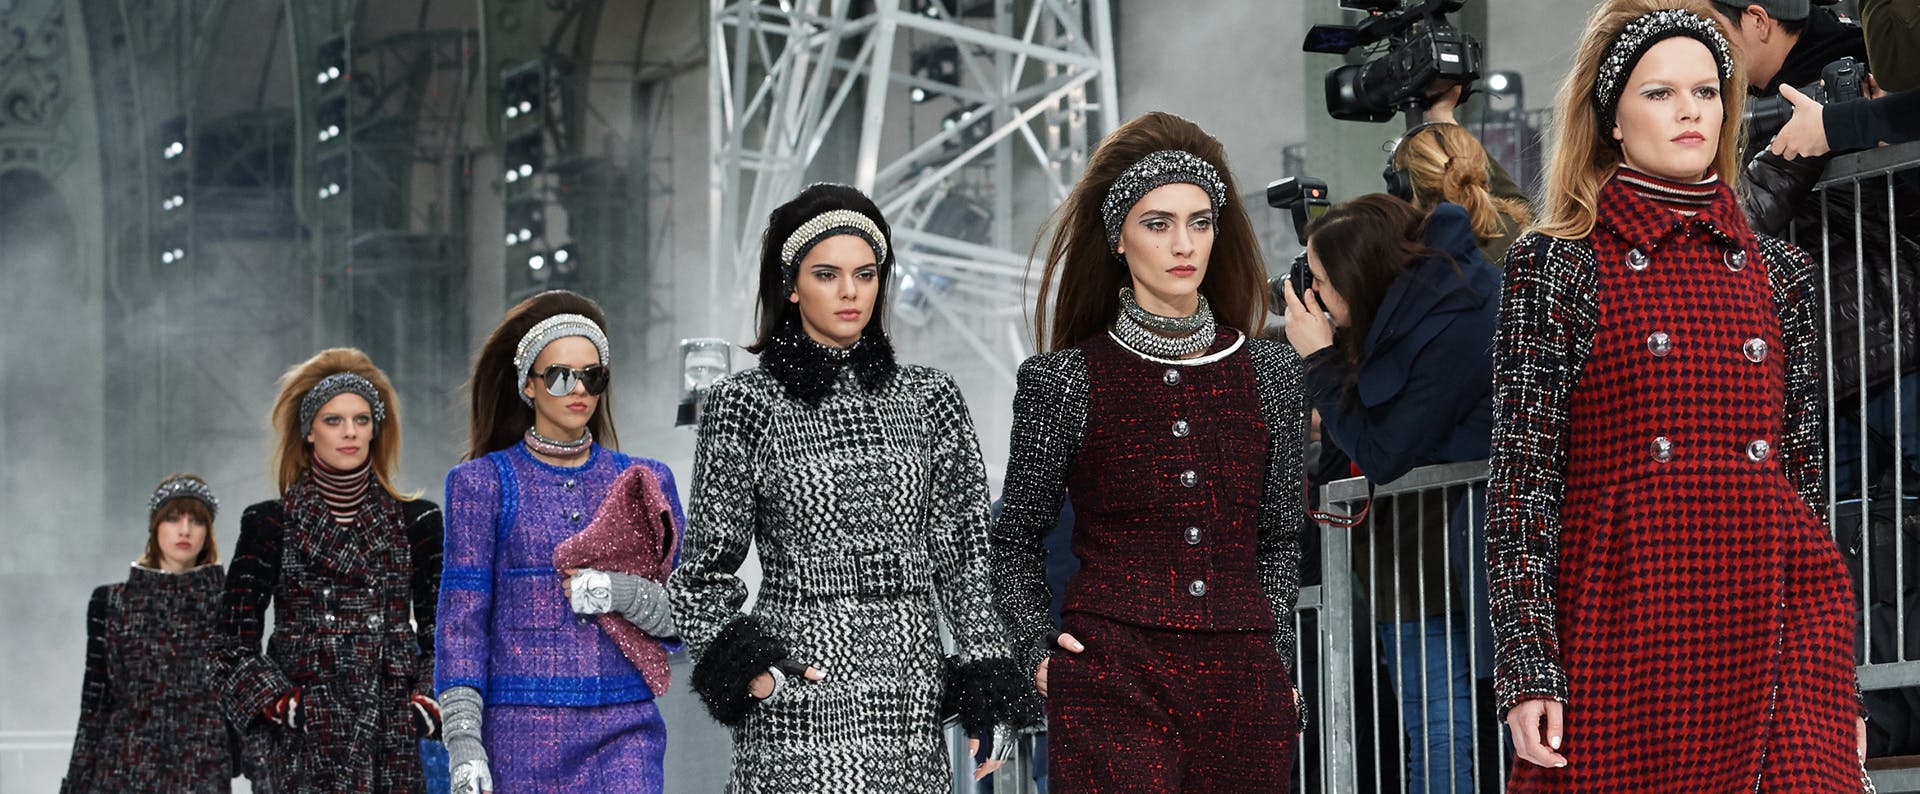 See the complete Chanel Fall 2017 Ready-to-Wear collection.